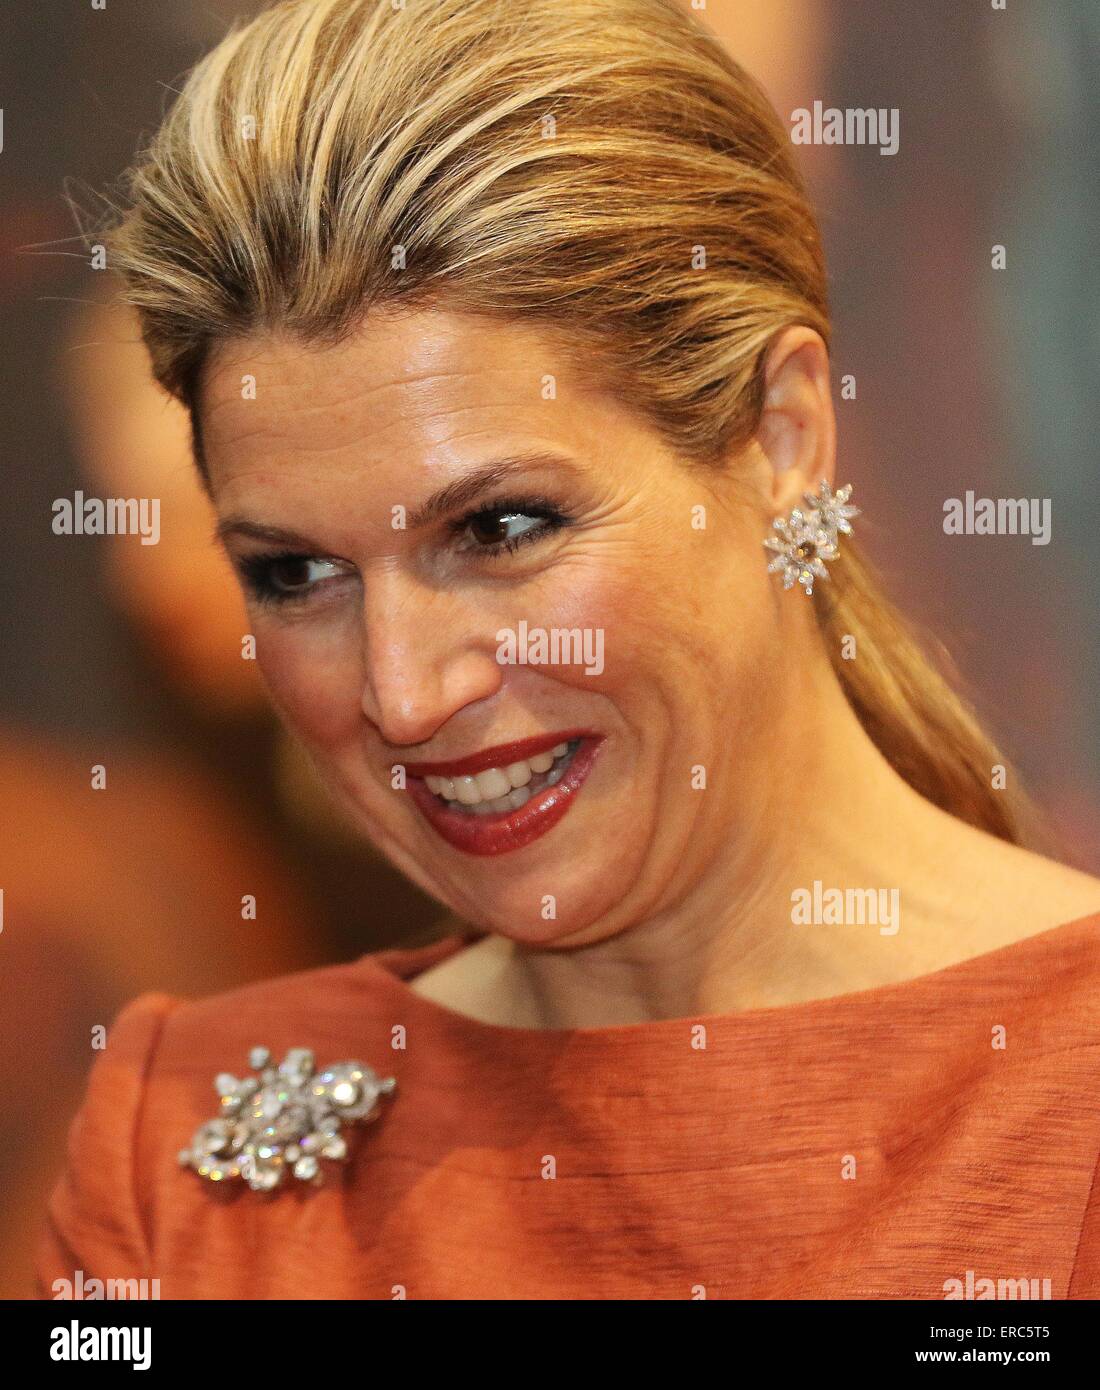 queen-maxima-of-the-netherlands-attends-the-meeting-with-the-dutch-ERC5T5.jpg